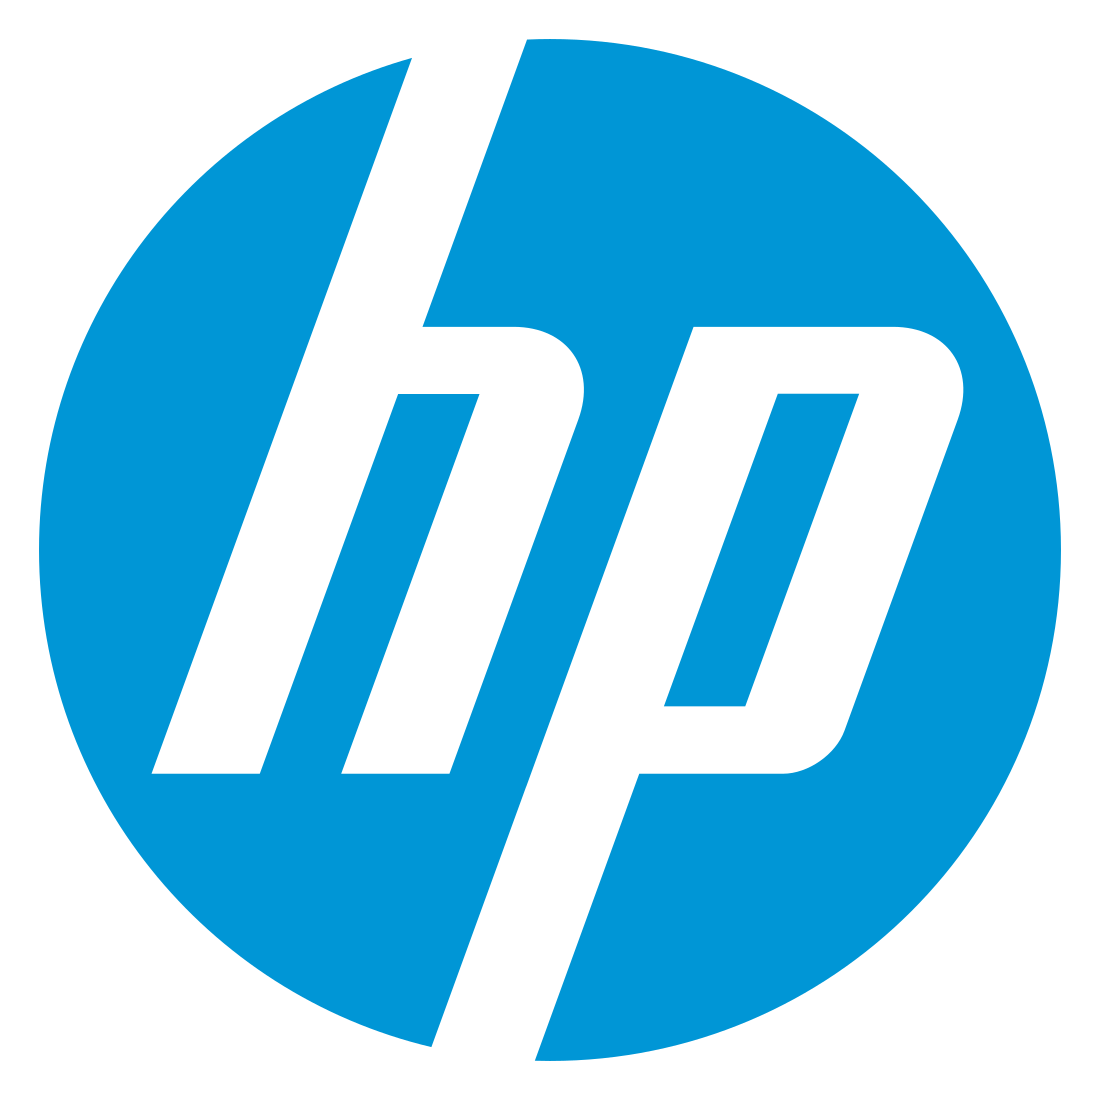 HP 15 N4020 dw1011nk, 4Go, 1 TO, 15.6 Gris